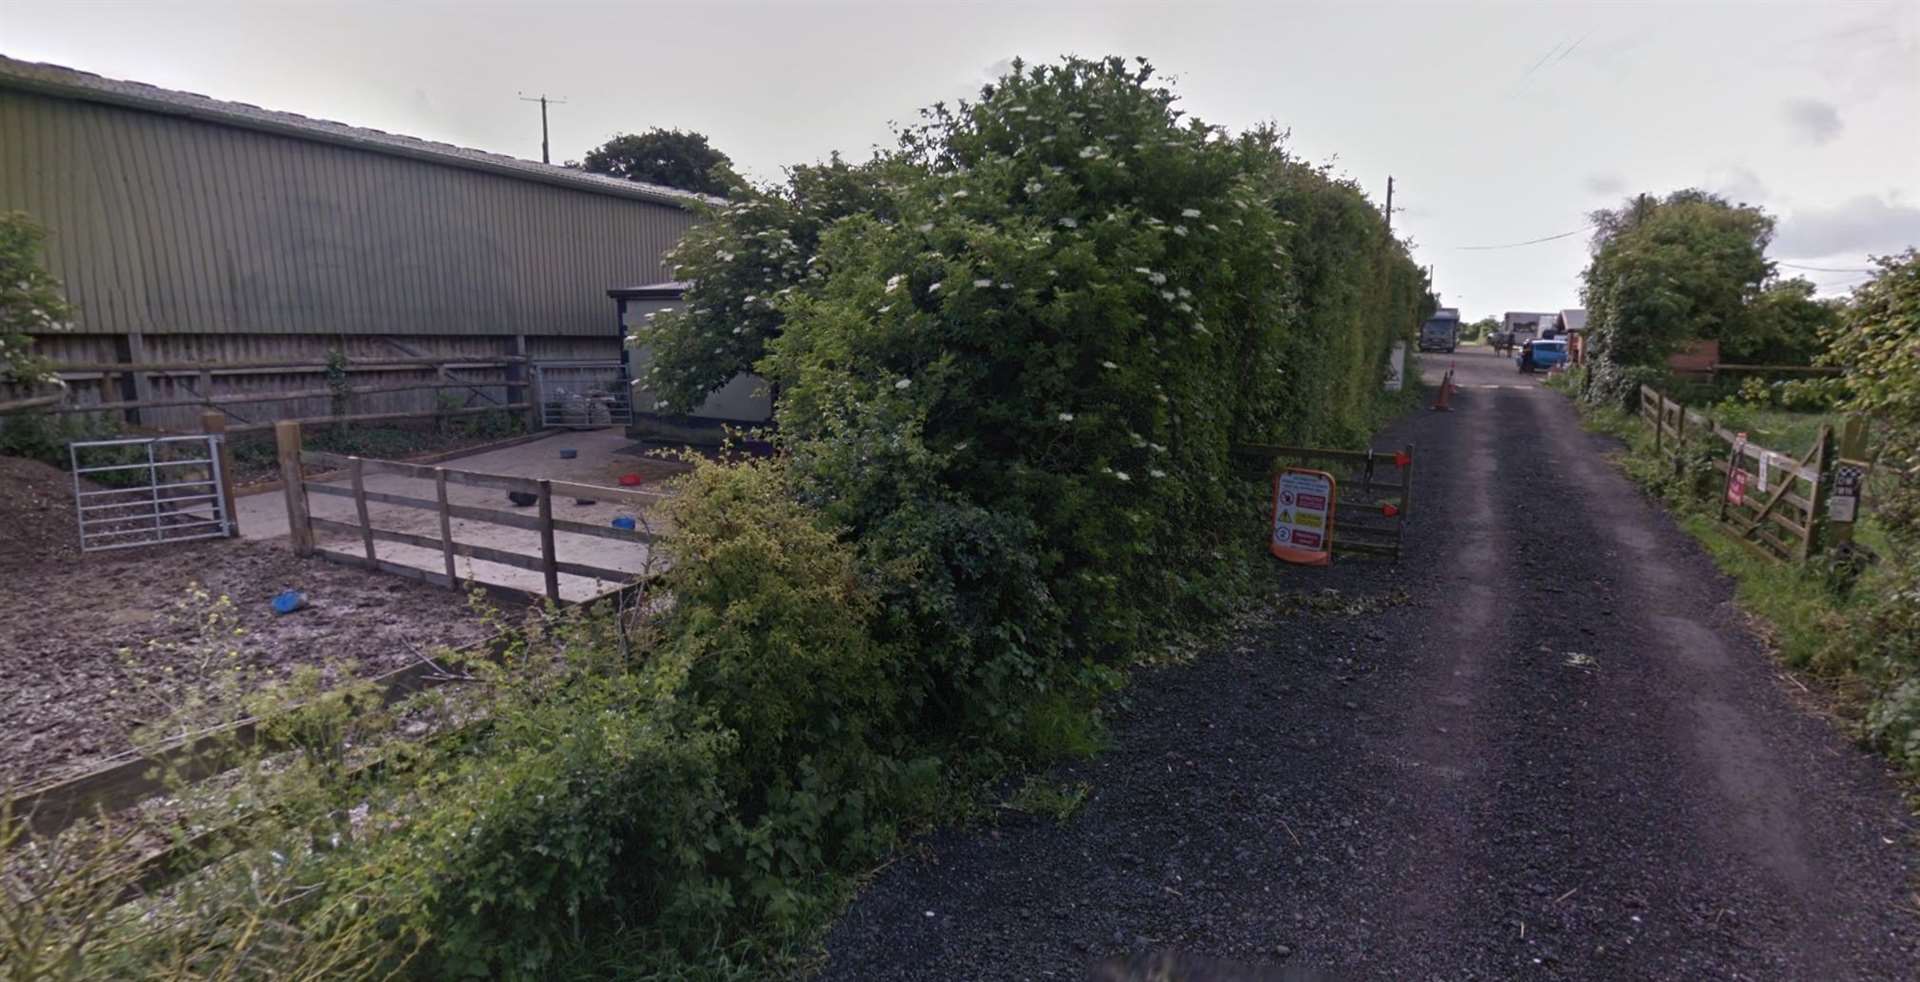 Firefighters were called to blaze at Nelson Park Riding Centre in Birchington